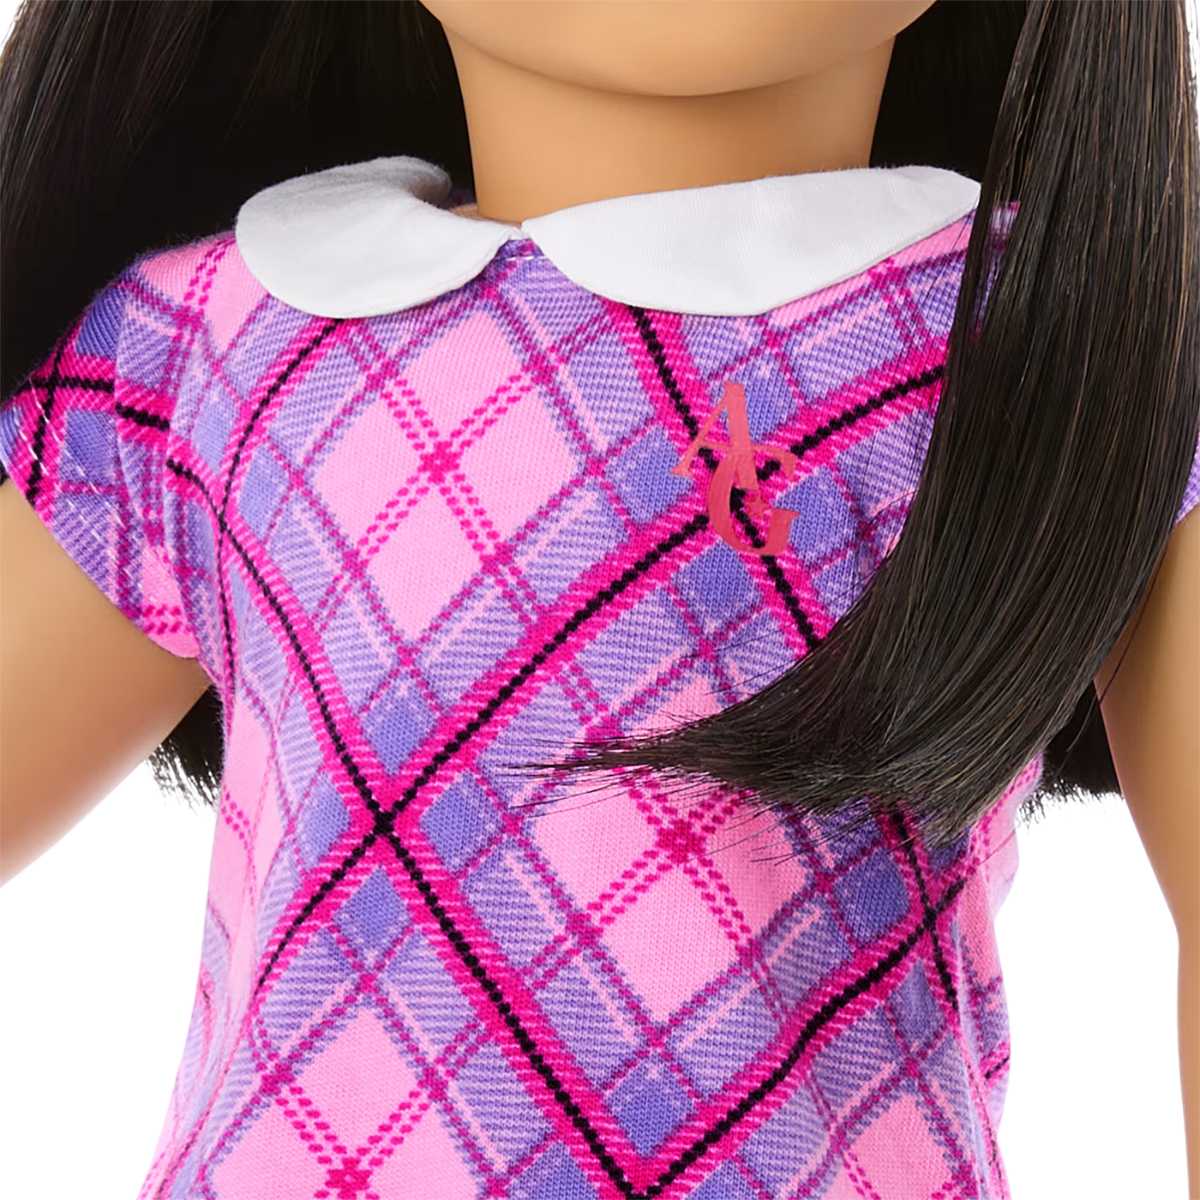 American Girl Truly Me Pretty Plaid Outfit for 18-inch Dolls - Simon's Collectibles